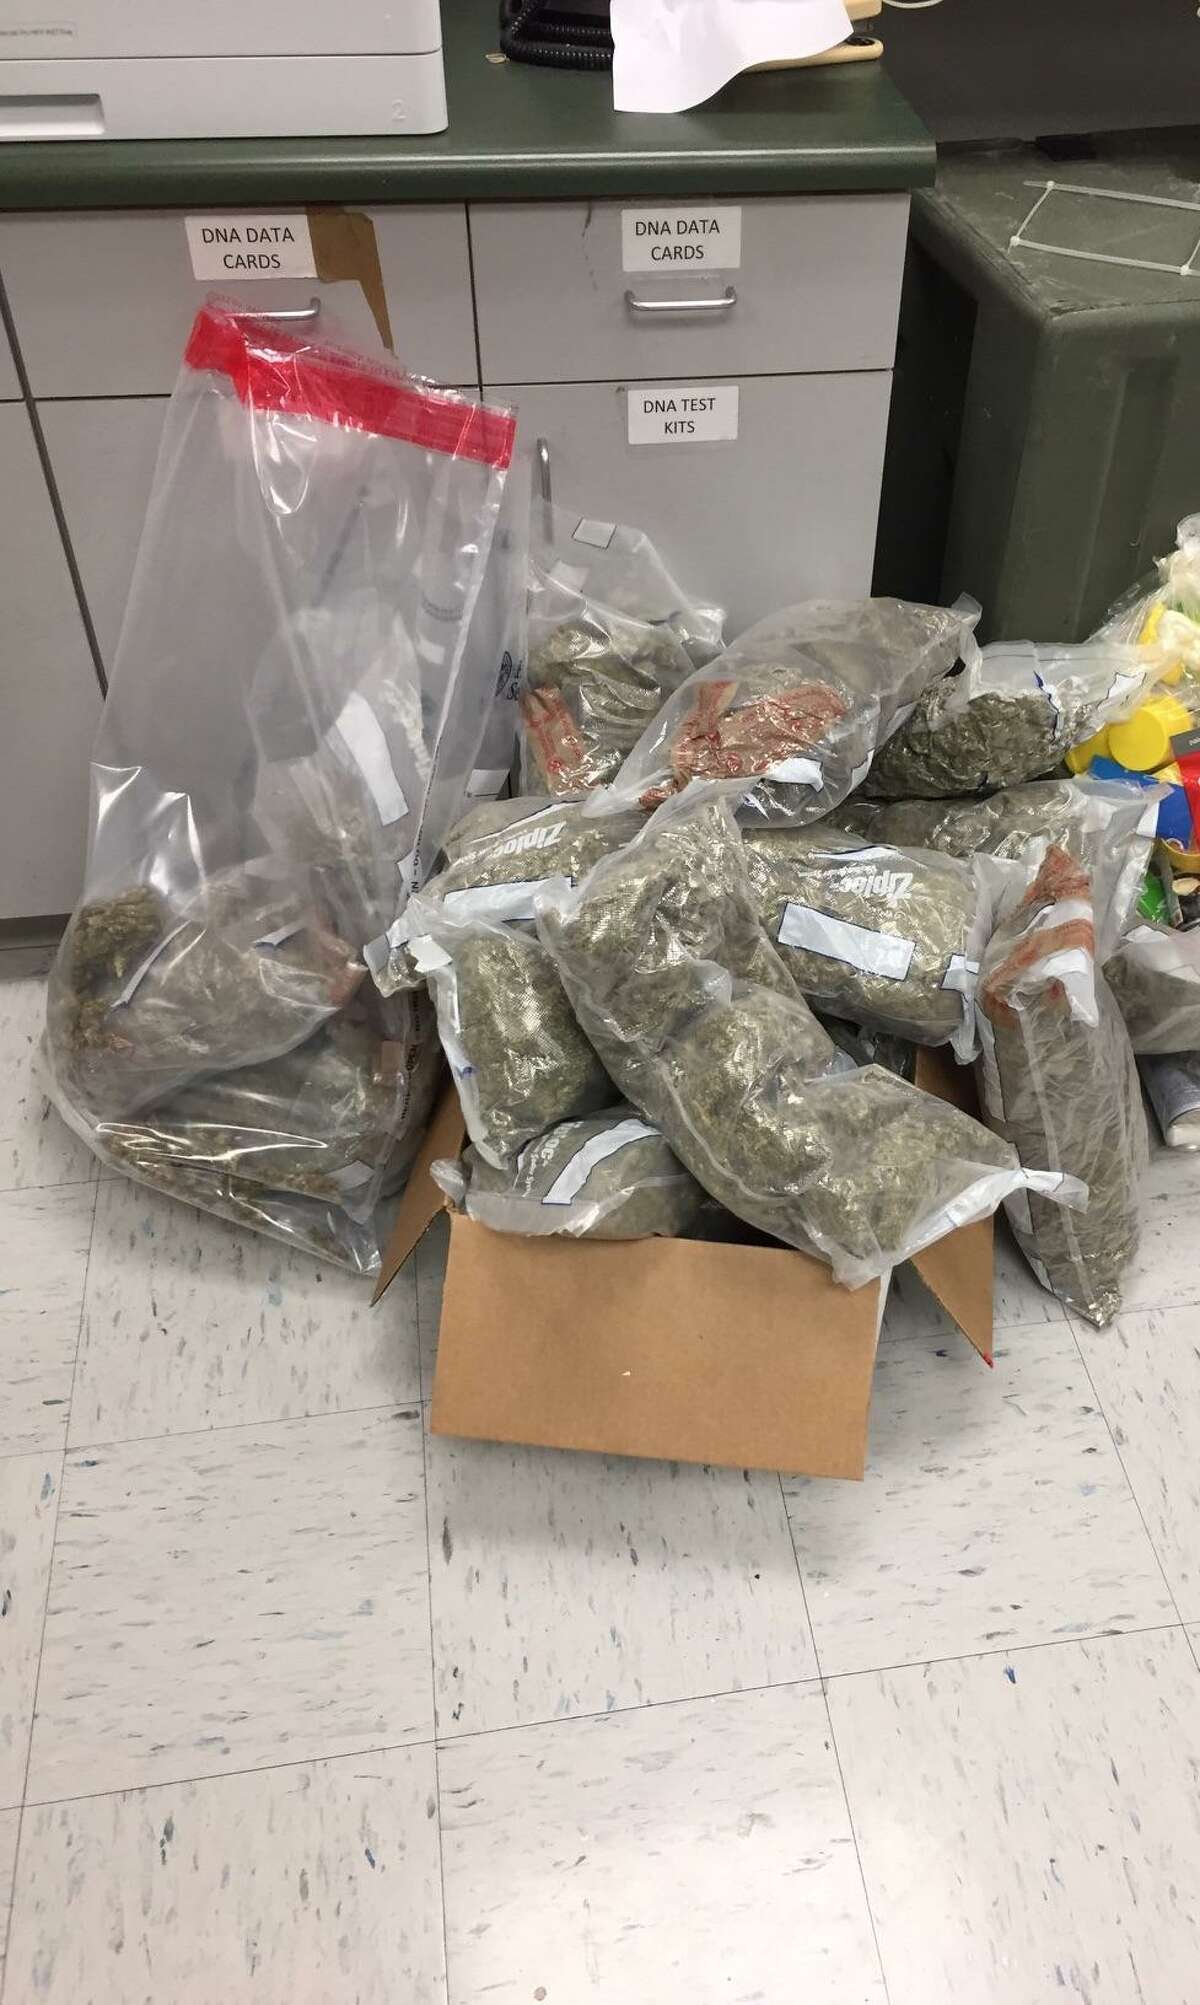 This photo shows parcels containing a total of 94 pounds of marijuana with an estimated street value of $75,200.